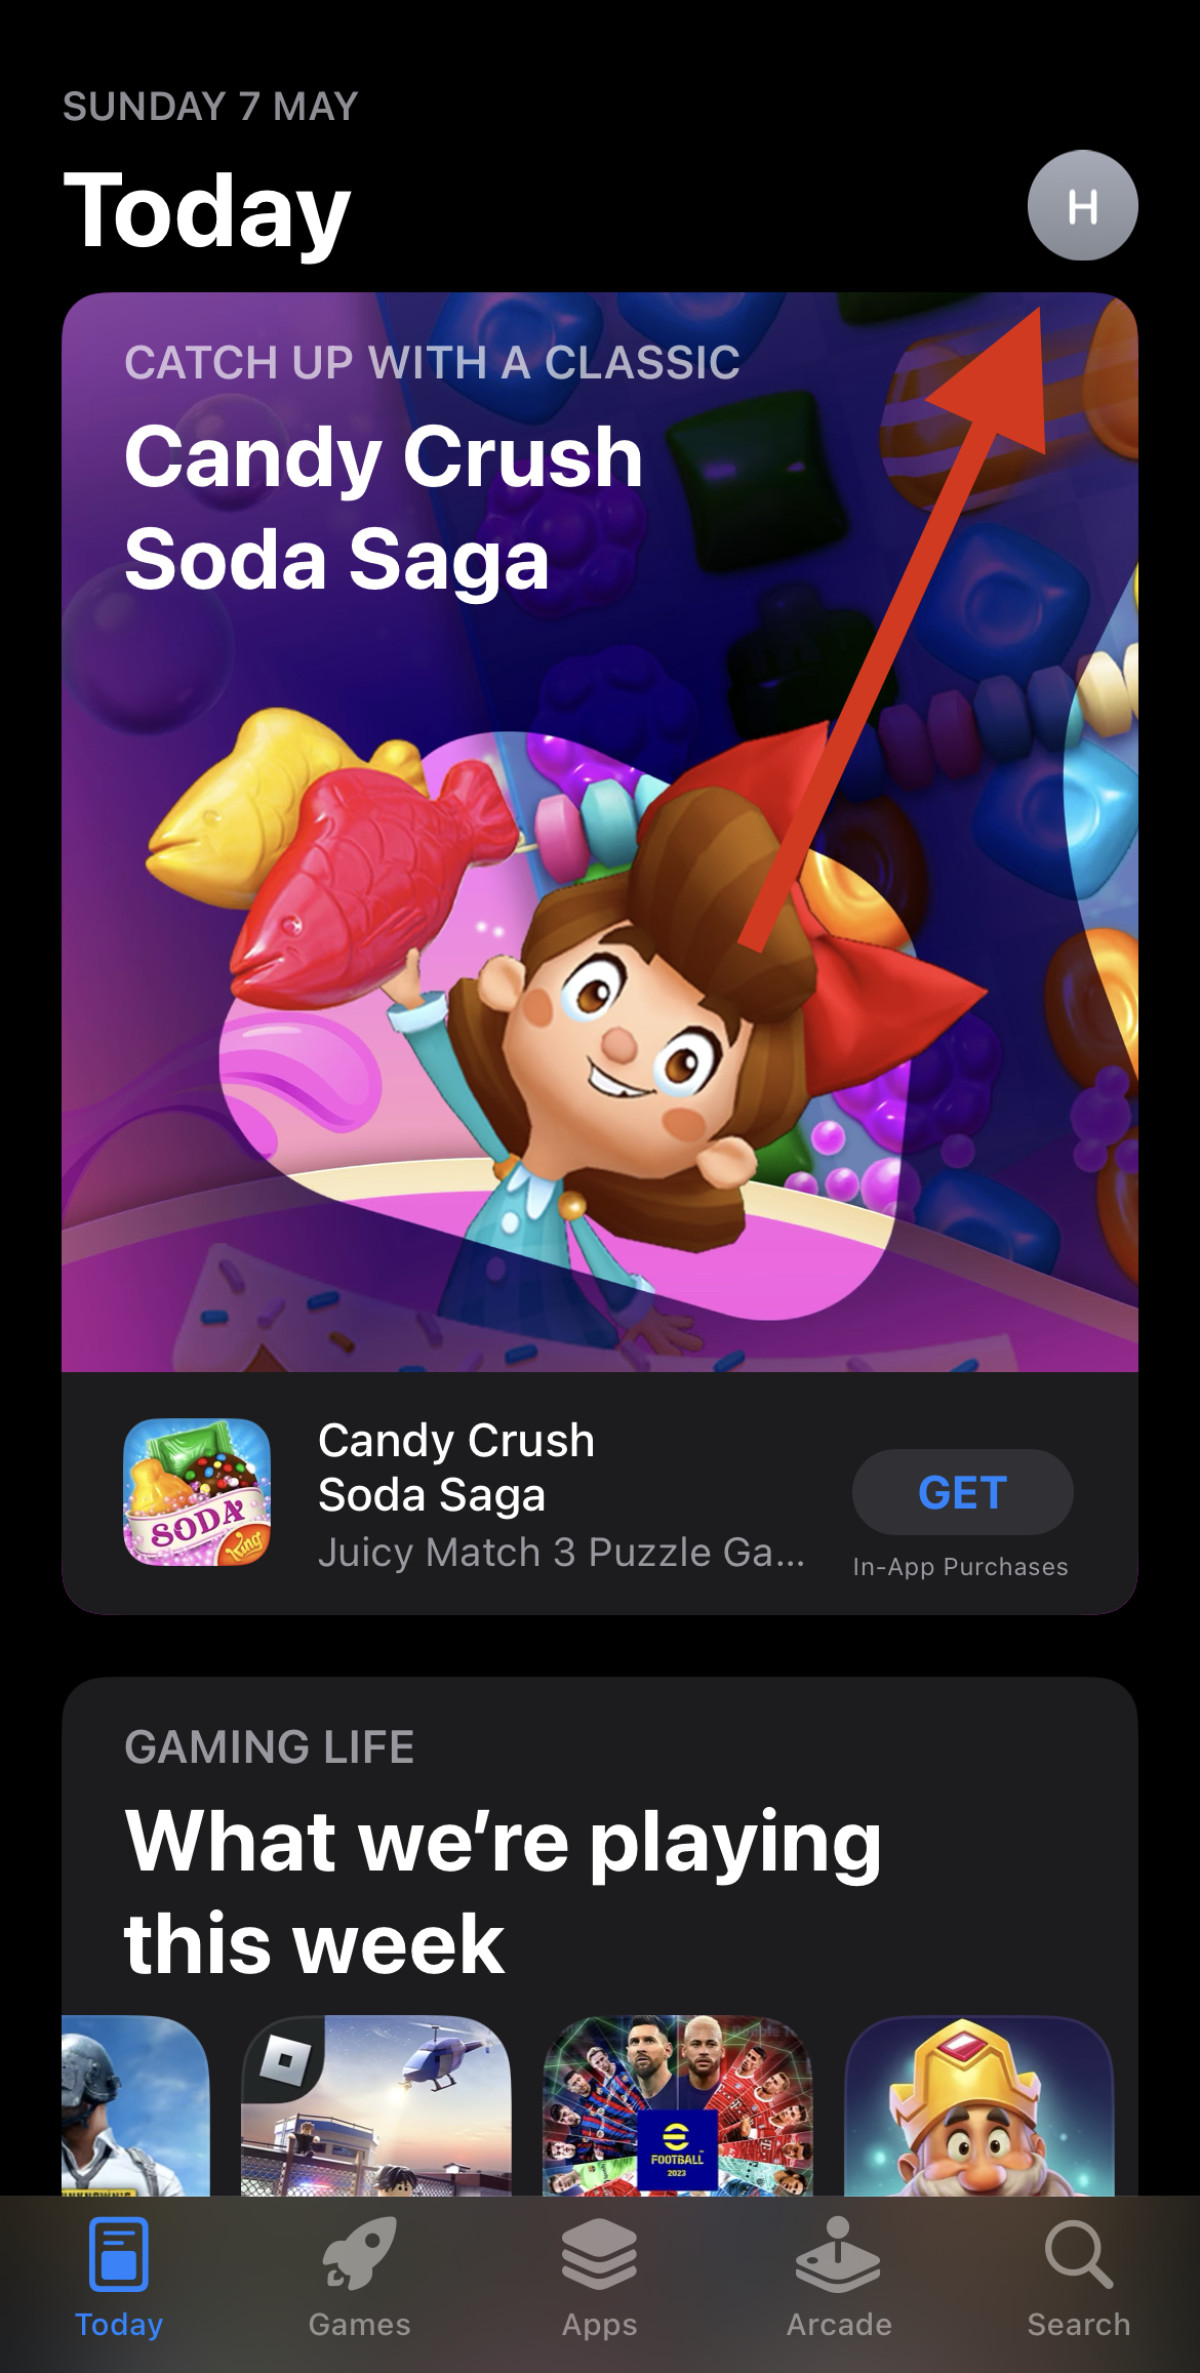 App store on the iPhone